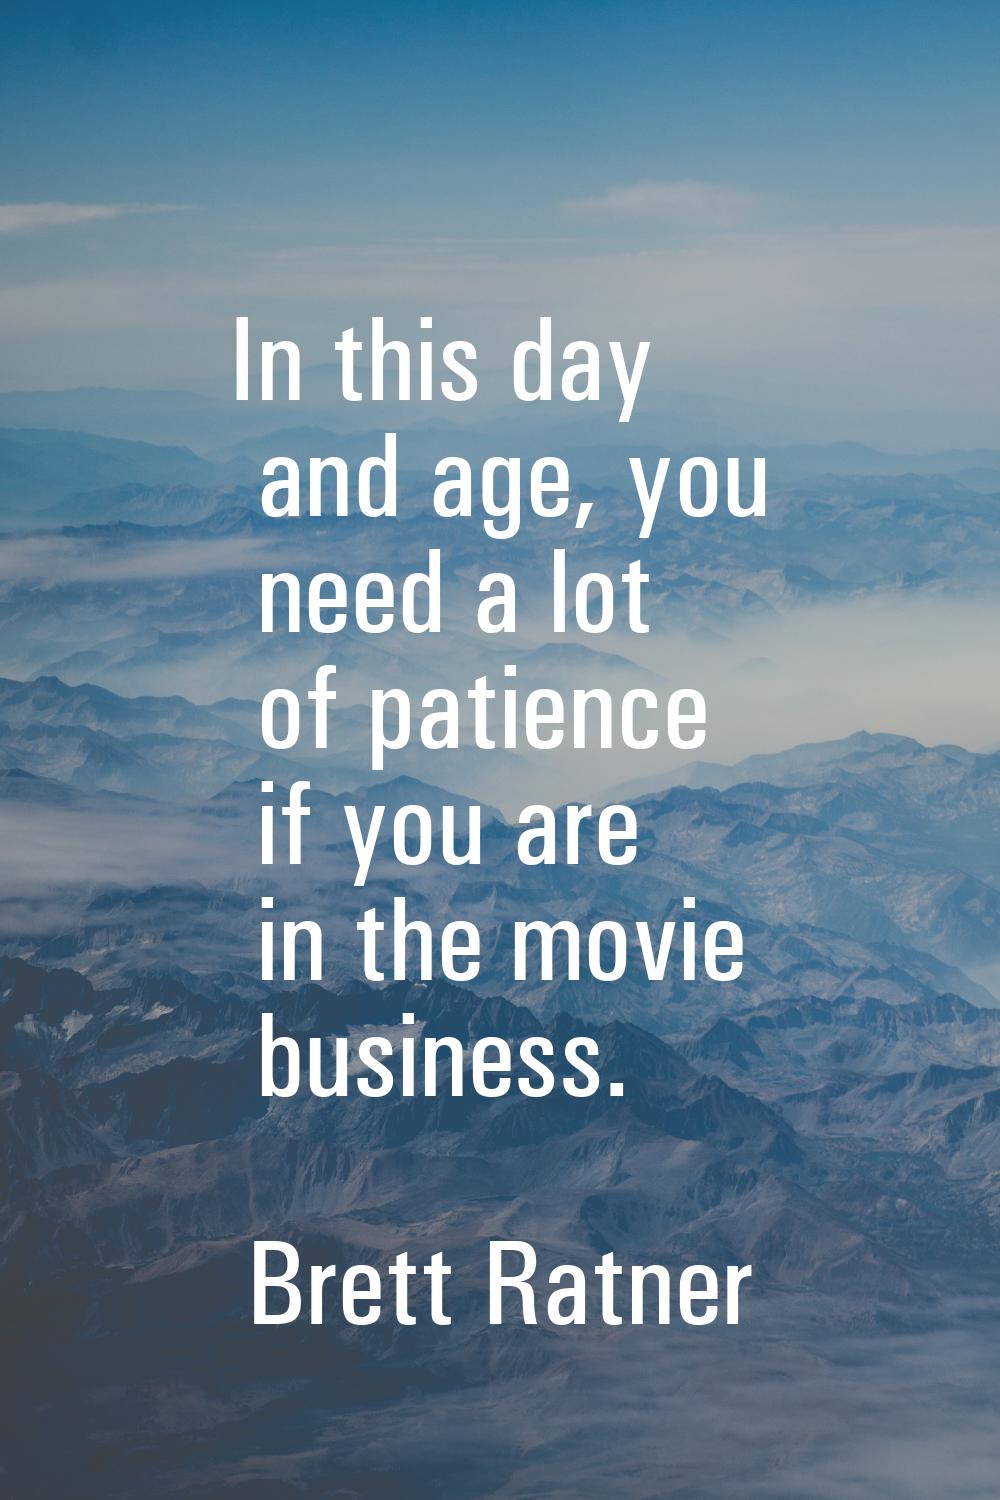 In this day and age, you need a lot of patience if you are in the movie business.